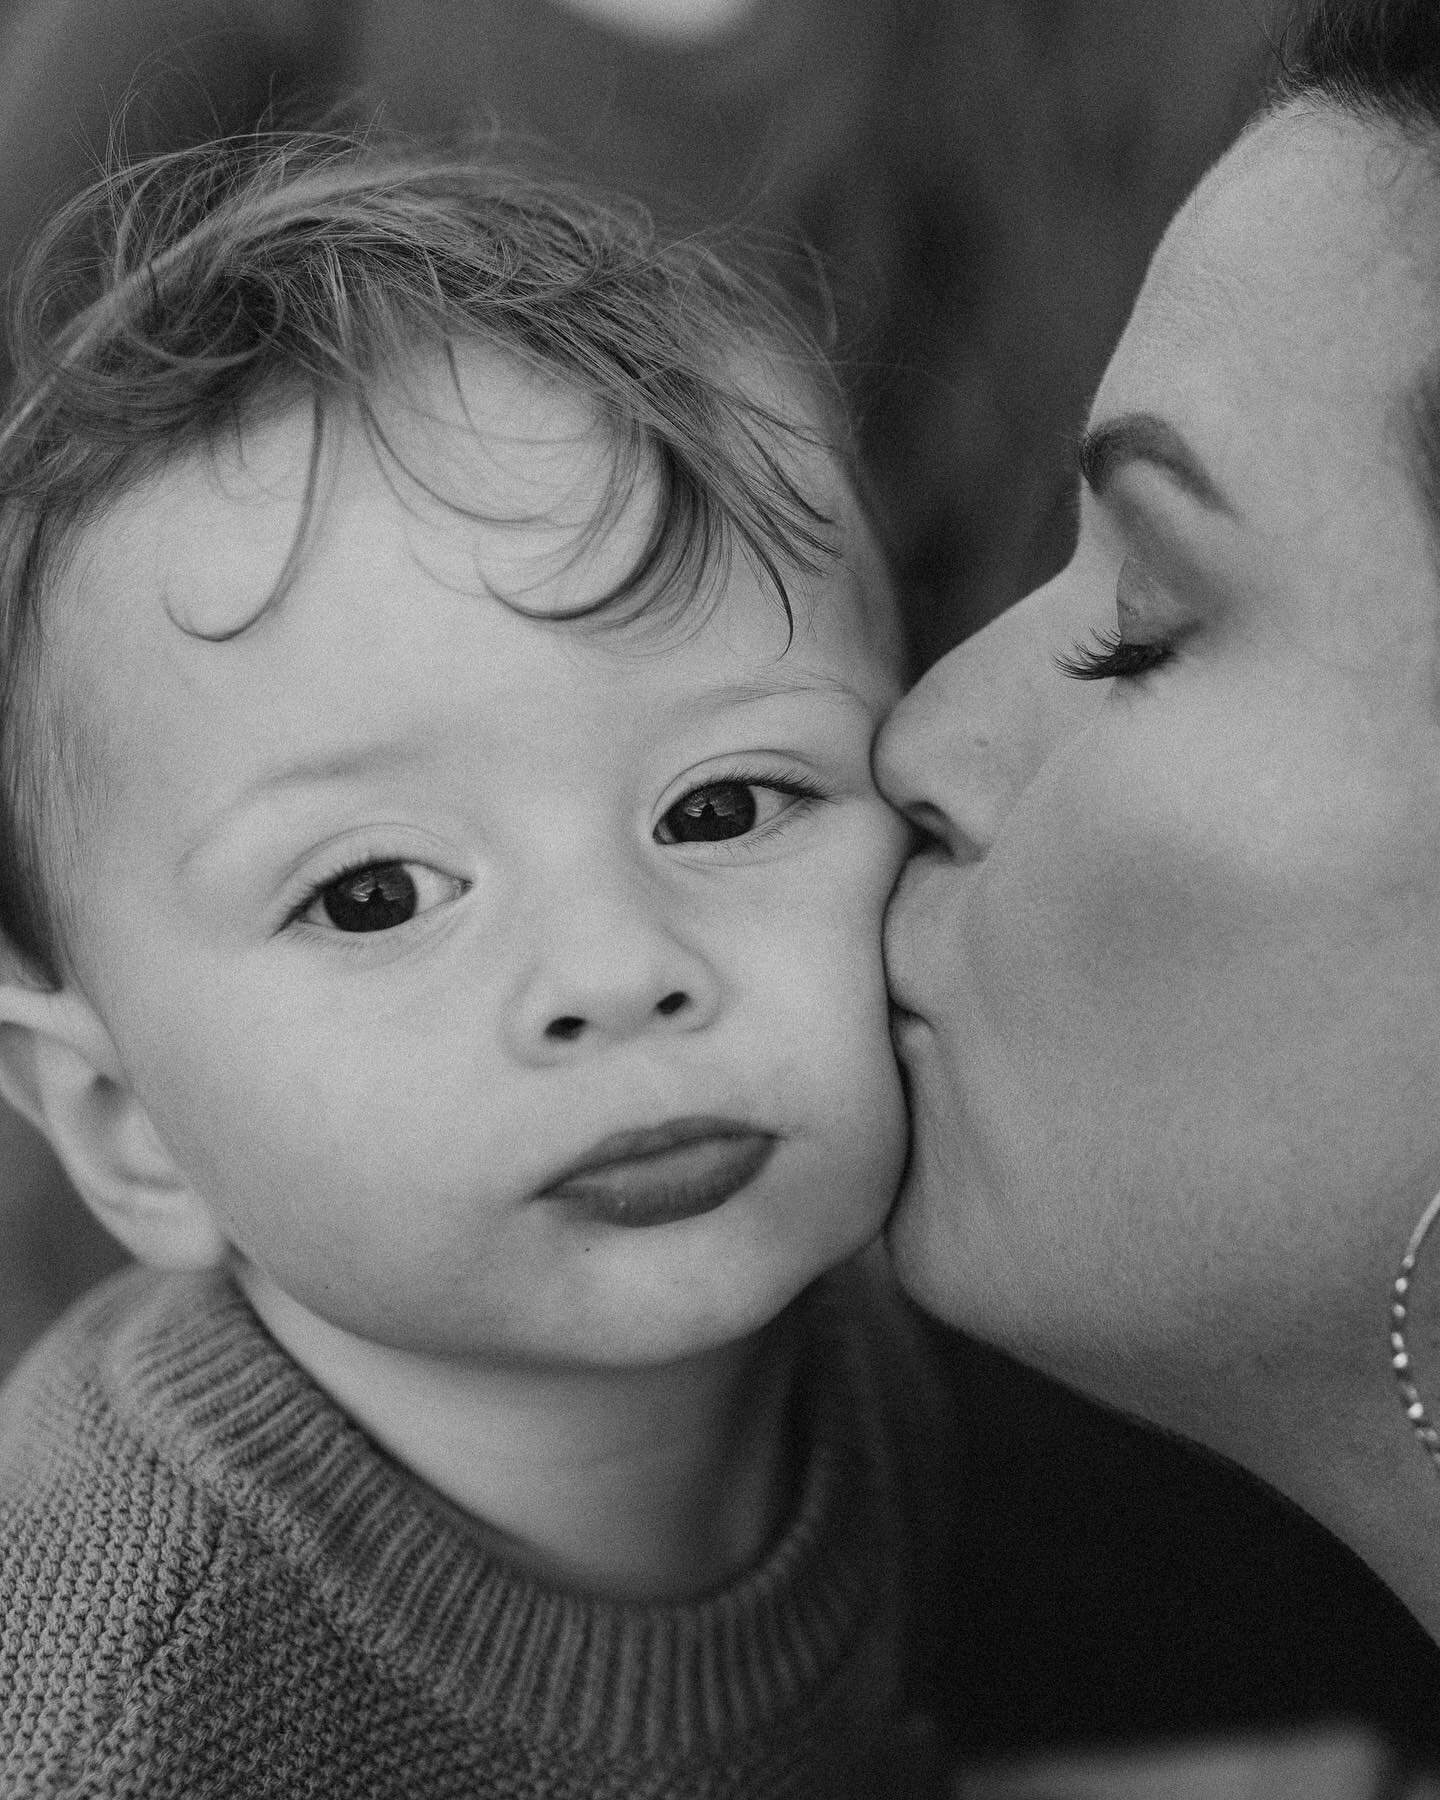 A black and white photo of a woman kissing a young child on the cheek. the child, wearing a sweater, looks at the camera with a calm expression.